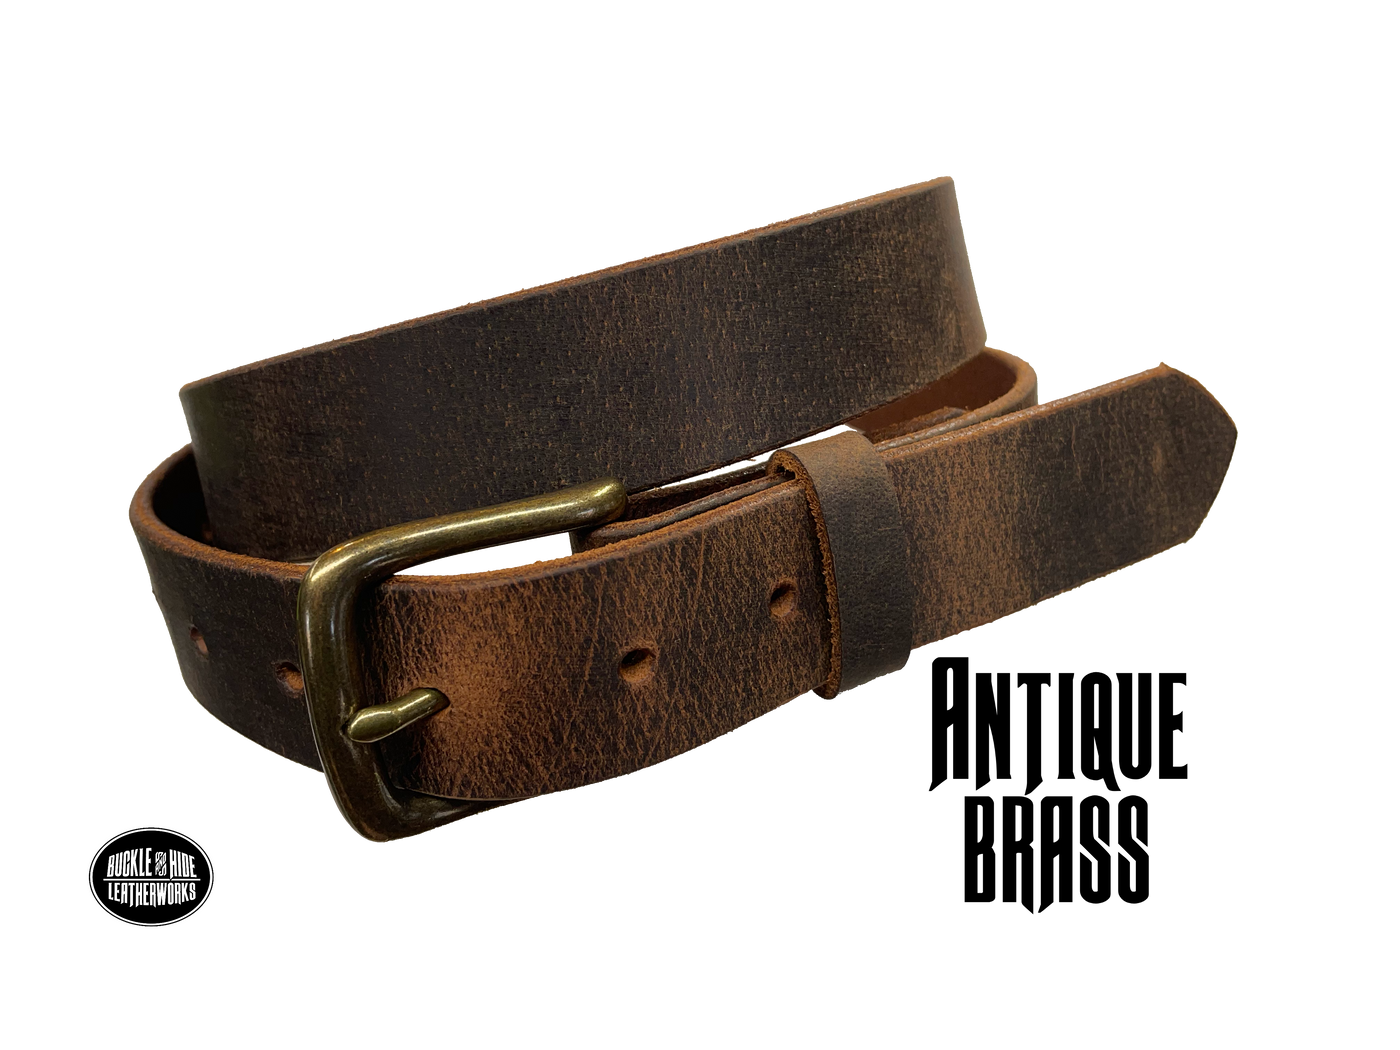 This is a full grain, solid leather, brown Water Buffalo belt with a distressed look and beveled smooth edges. The strap is 1 1/4" wide, approximately 1/8" thick, in sizes from 34" to 44" from buckle end to hole most worn. The antique brass finish buckle is held in place with 2 snaps for easy buckle change. Great for everyday wear or casual office dress. Handmade in our Smyrna, TN shop, just outside Nashville.